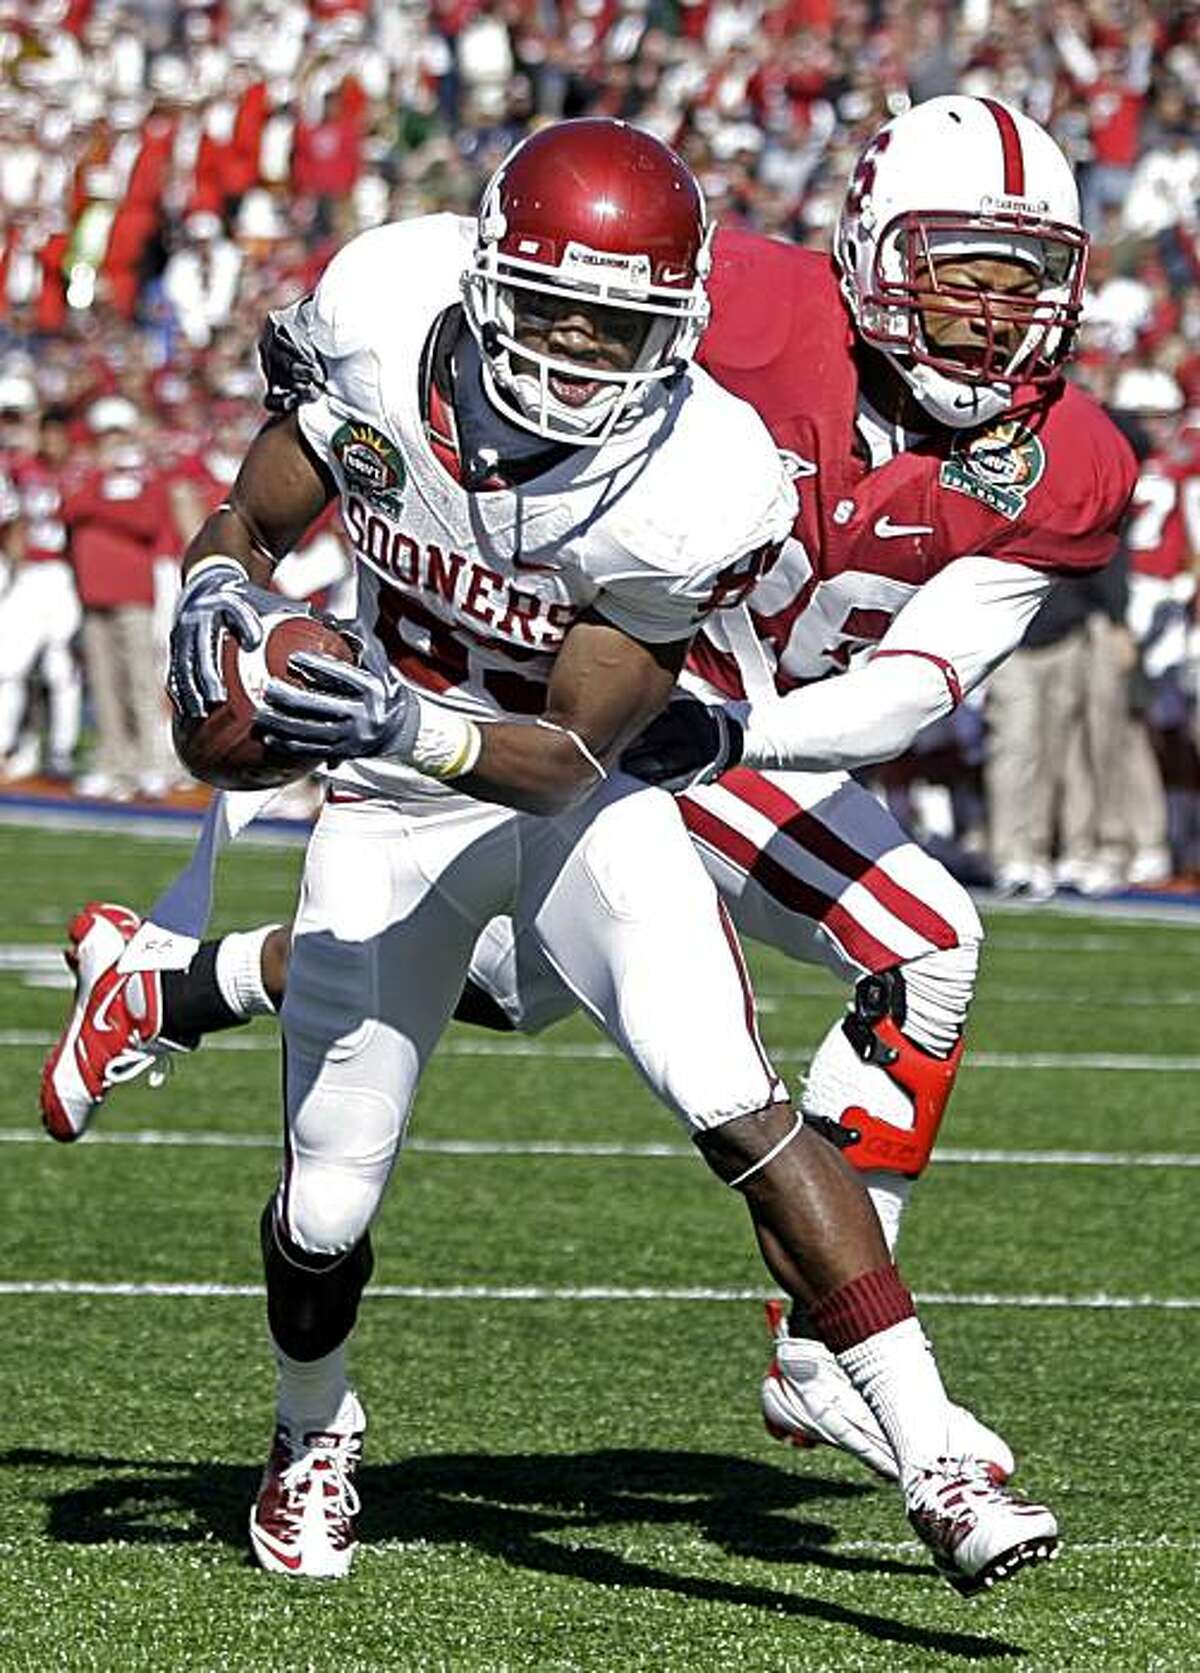 Oklahoma wide receiver Ryan Broyles (85) scores a touchdown as Stanford safety Delano Howell (26) defends during the first half of the Sun Bowl NCAA colllege football game in El Paso, Texas, Thursday, Dec. 31, 2009. (AP Photo/LM Otero)